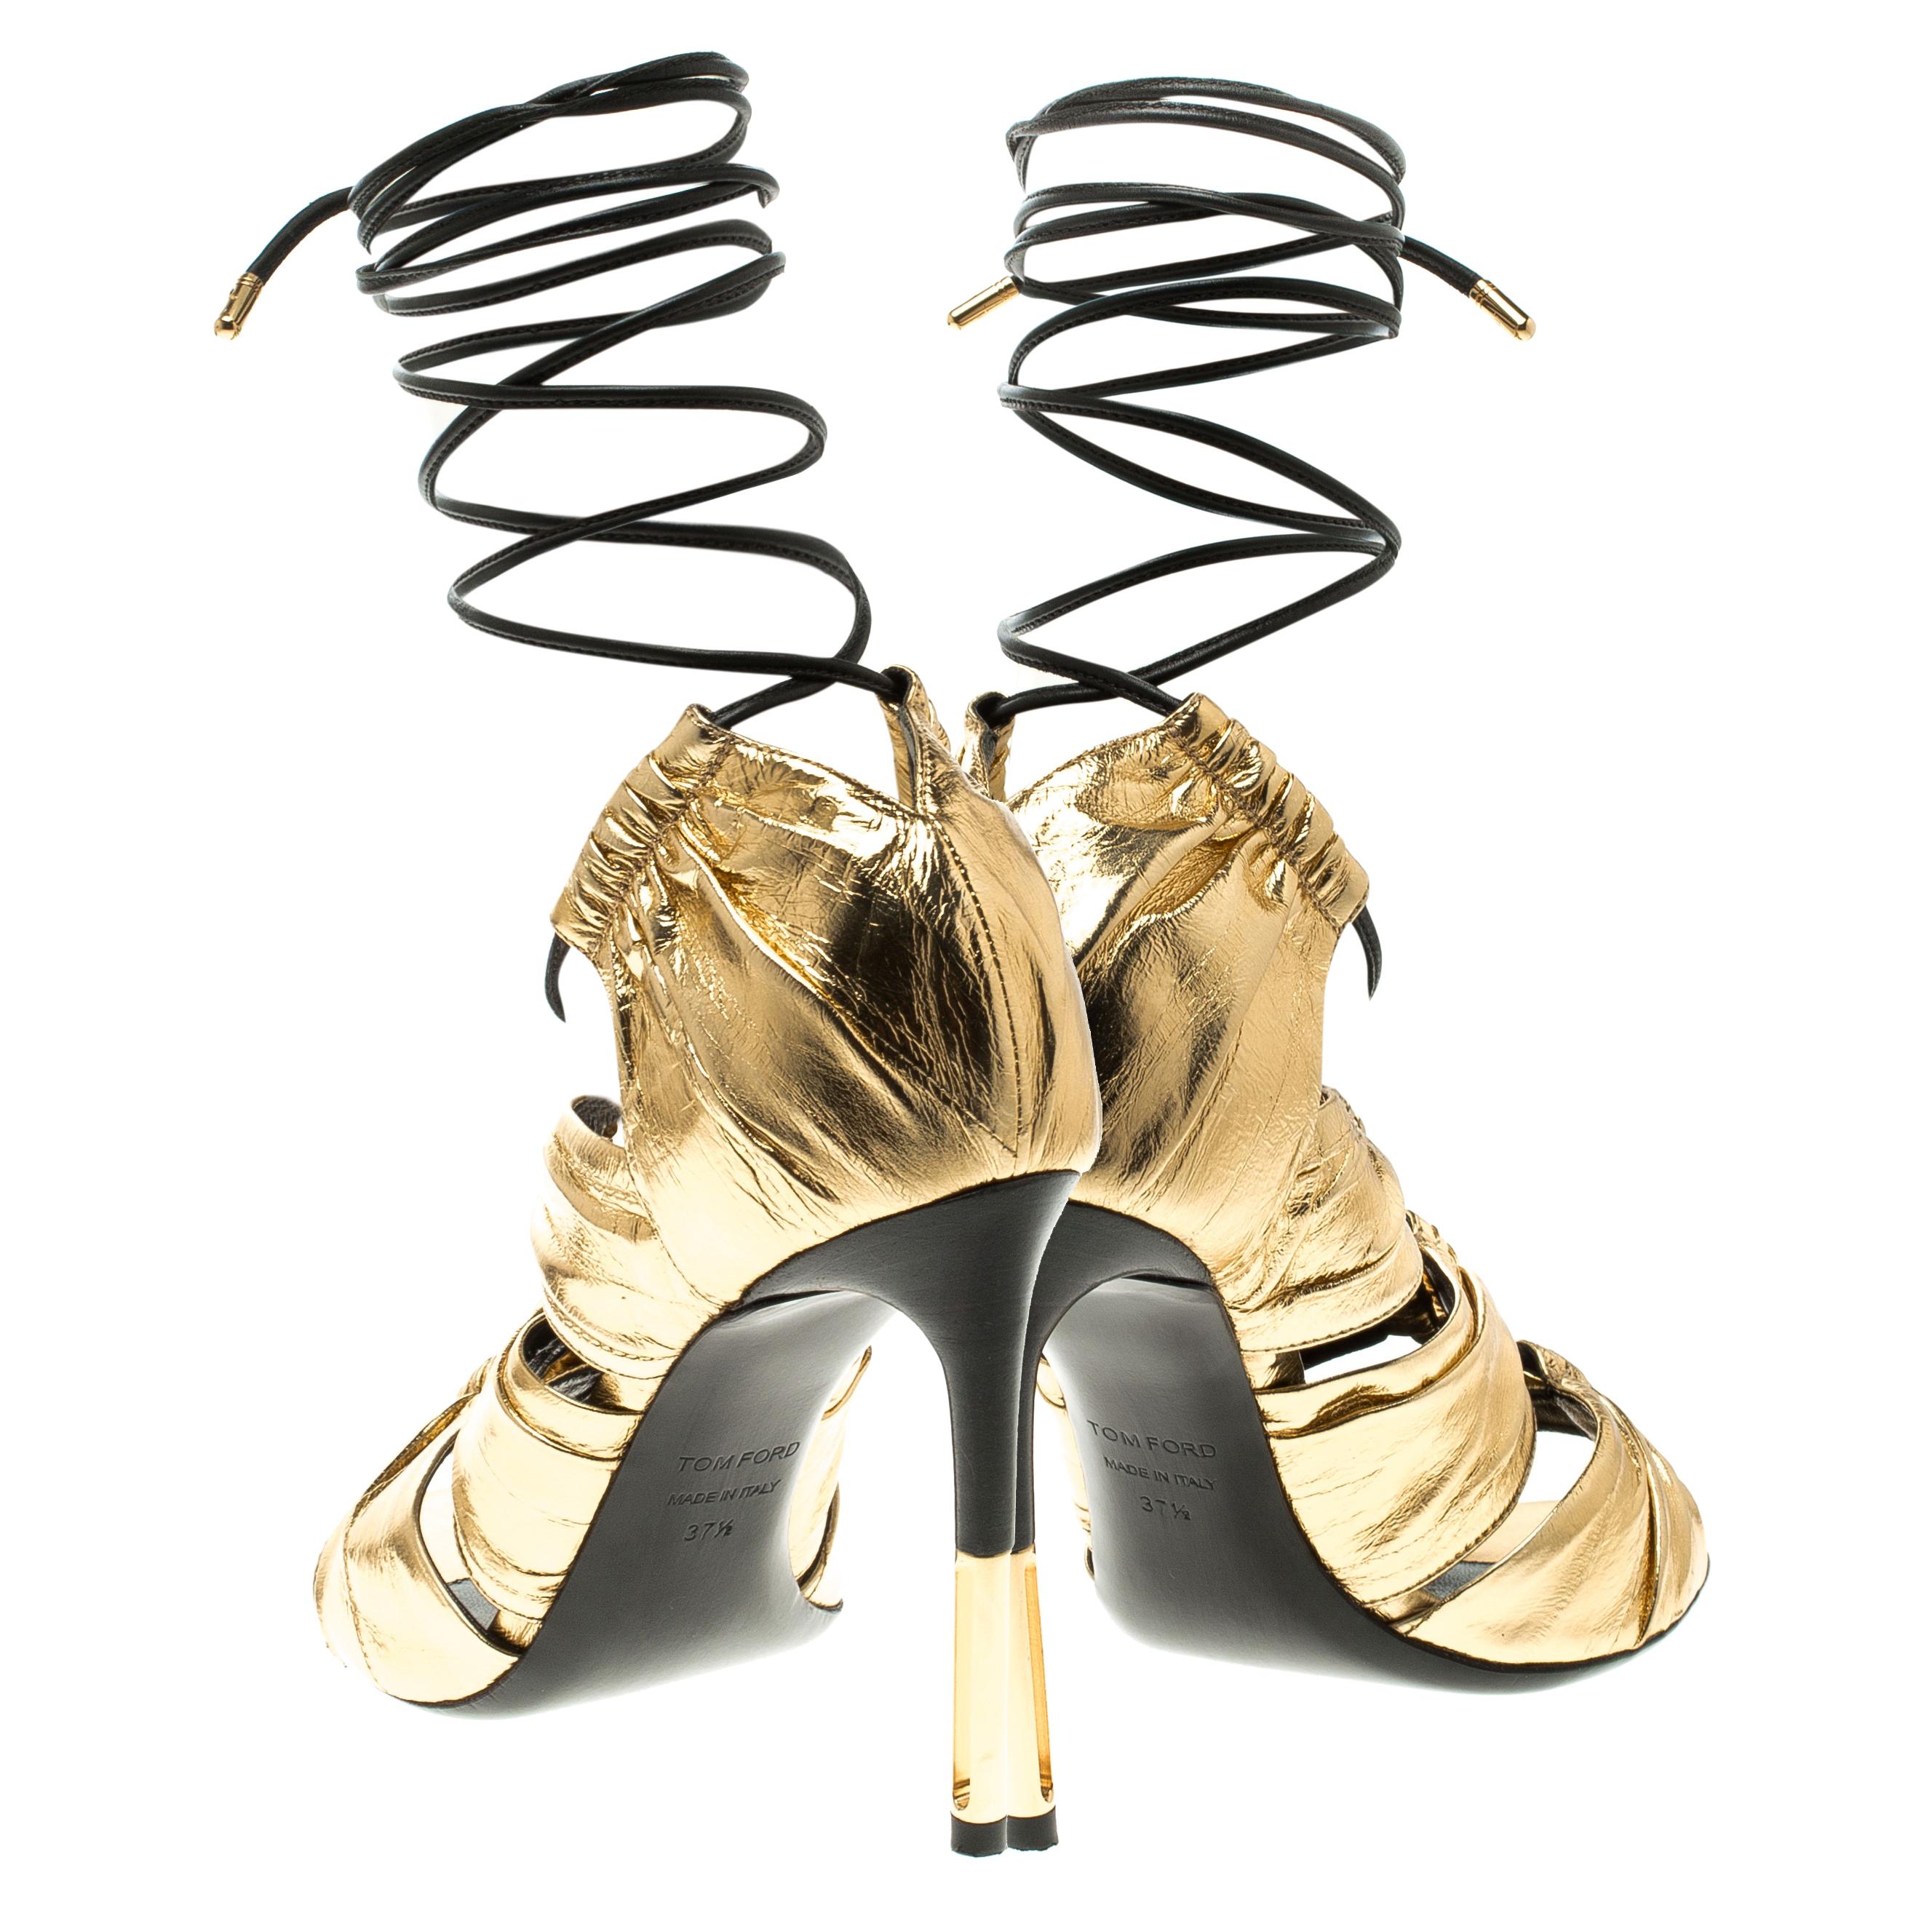 Tom Ford Metallic Gold Leather Stardust Lace Up Cage Sandals Size 37.5 im Zustand „Gut“ in Dubai, Al Qouz 2